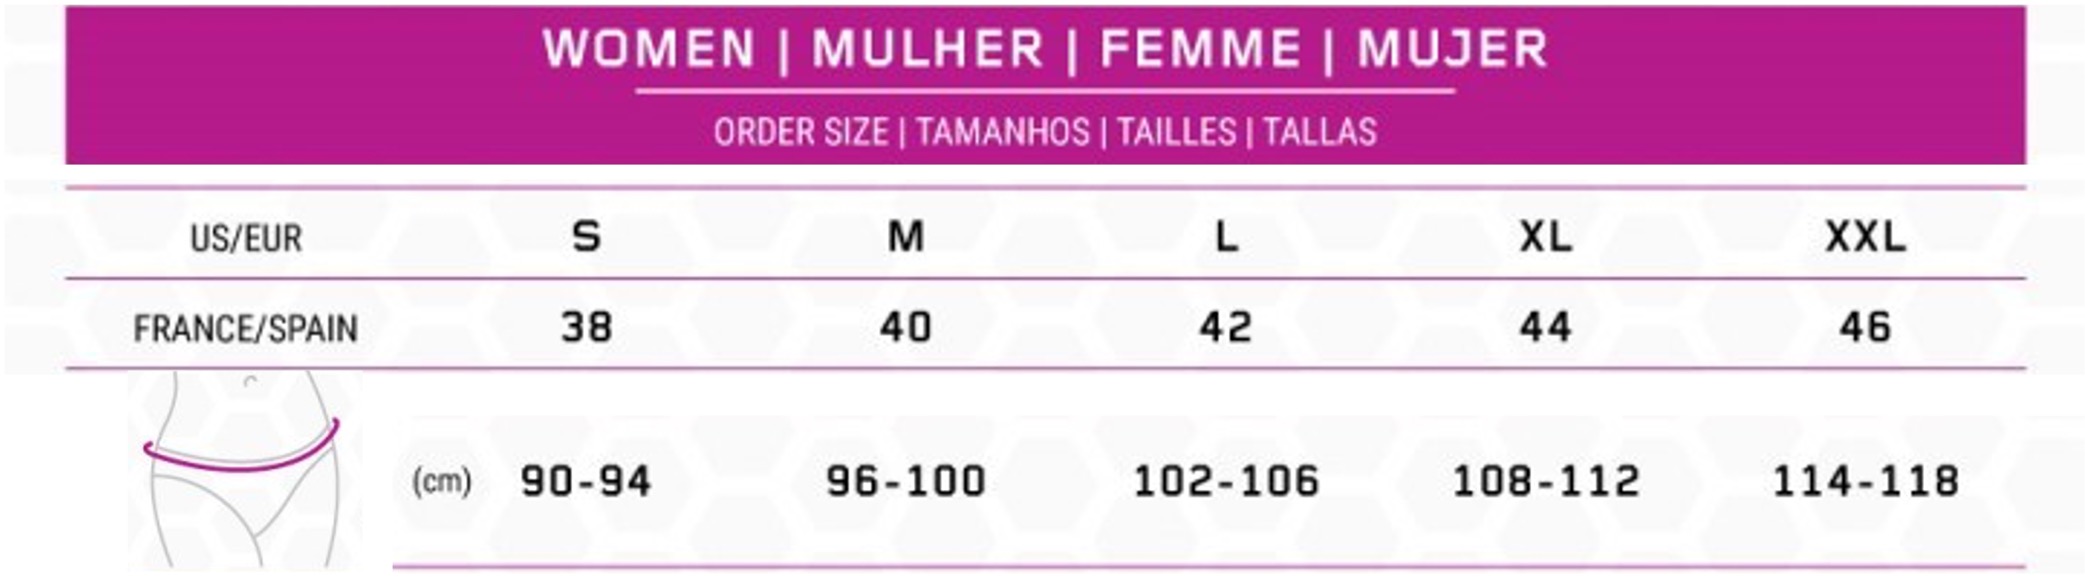 Guide des tailles femmes - ProtechDry.jpg